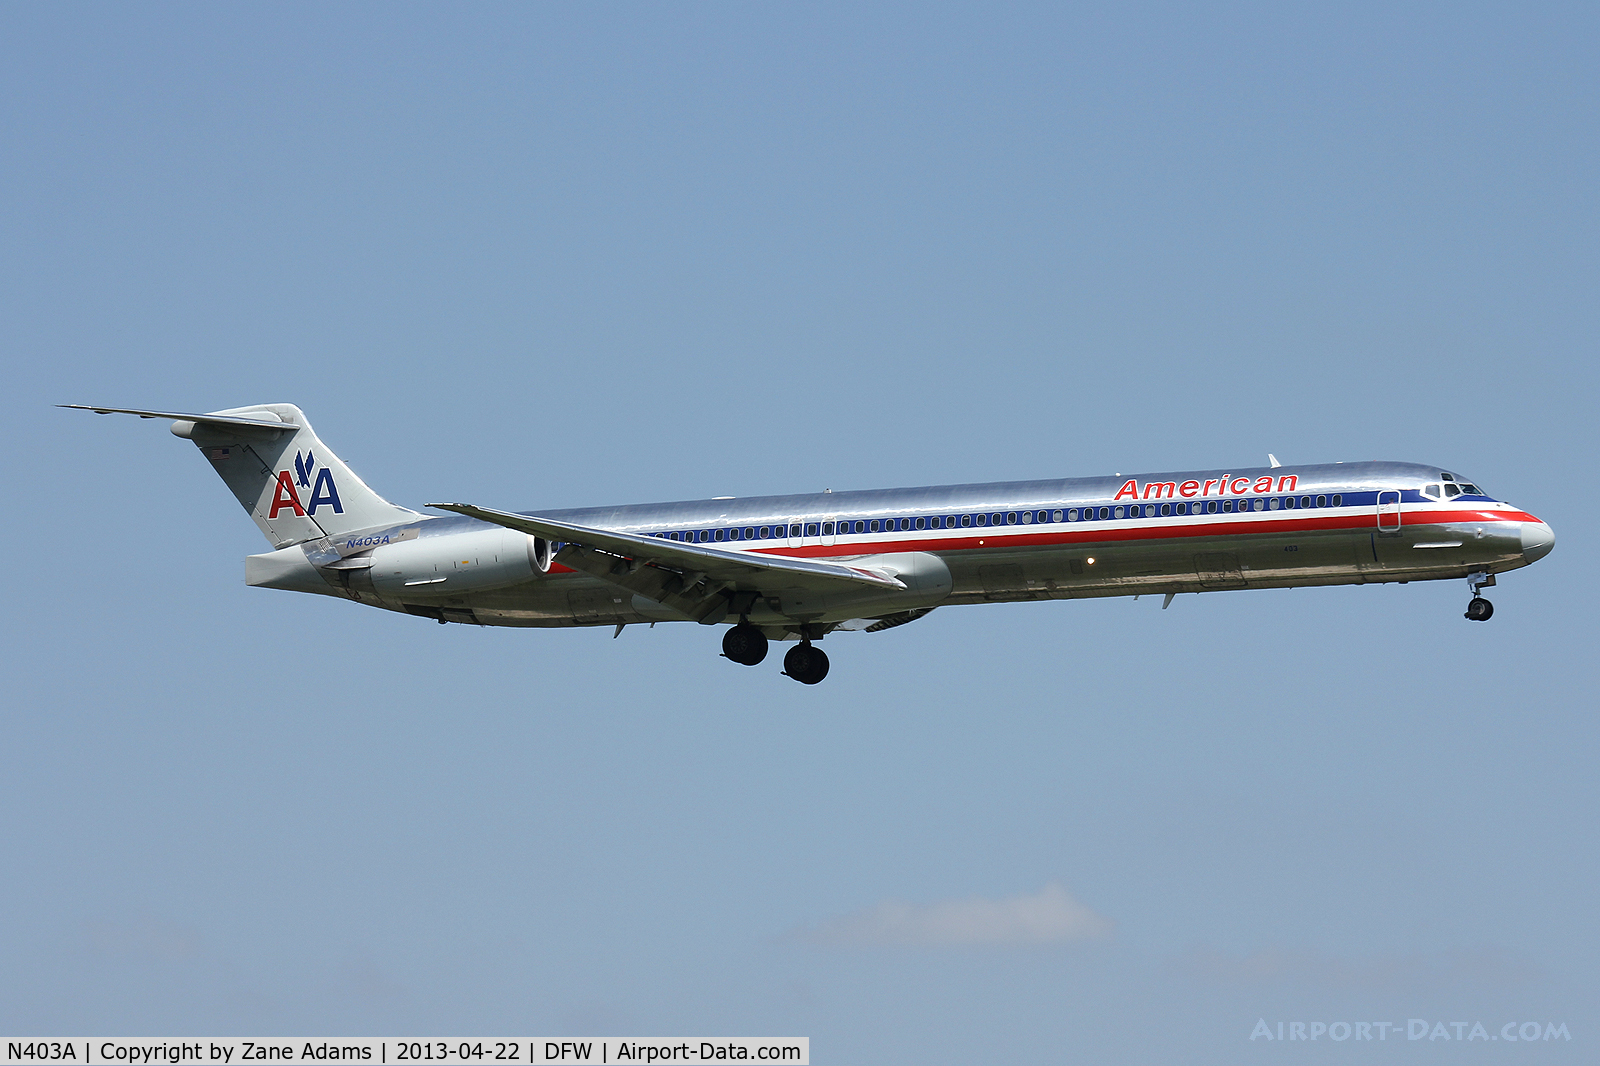 N403A, 1986 McDonnell Douglas MD-82 (DC-9-82) C/N 49314, American Airlines at DFW Airport